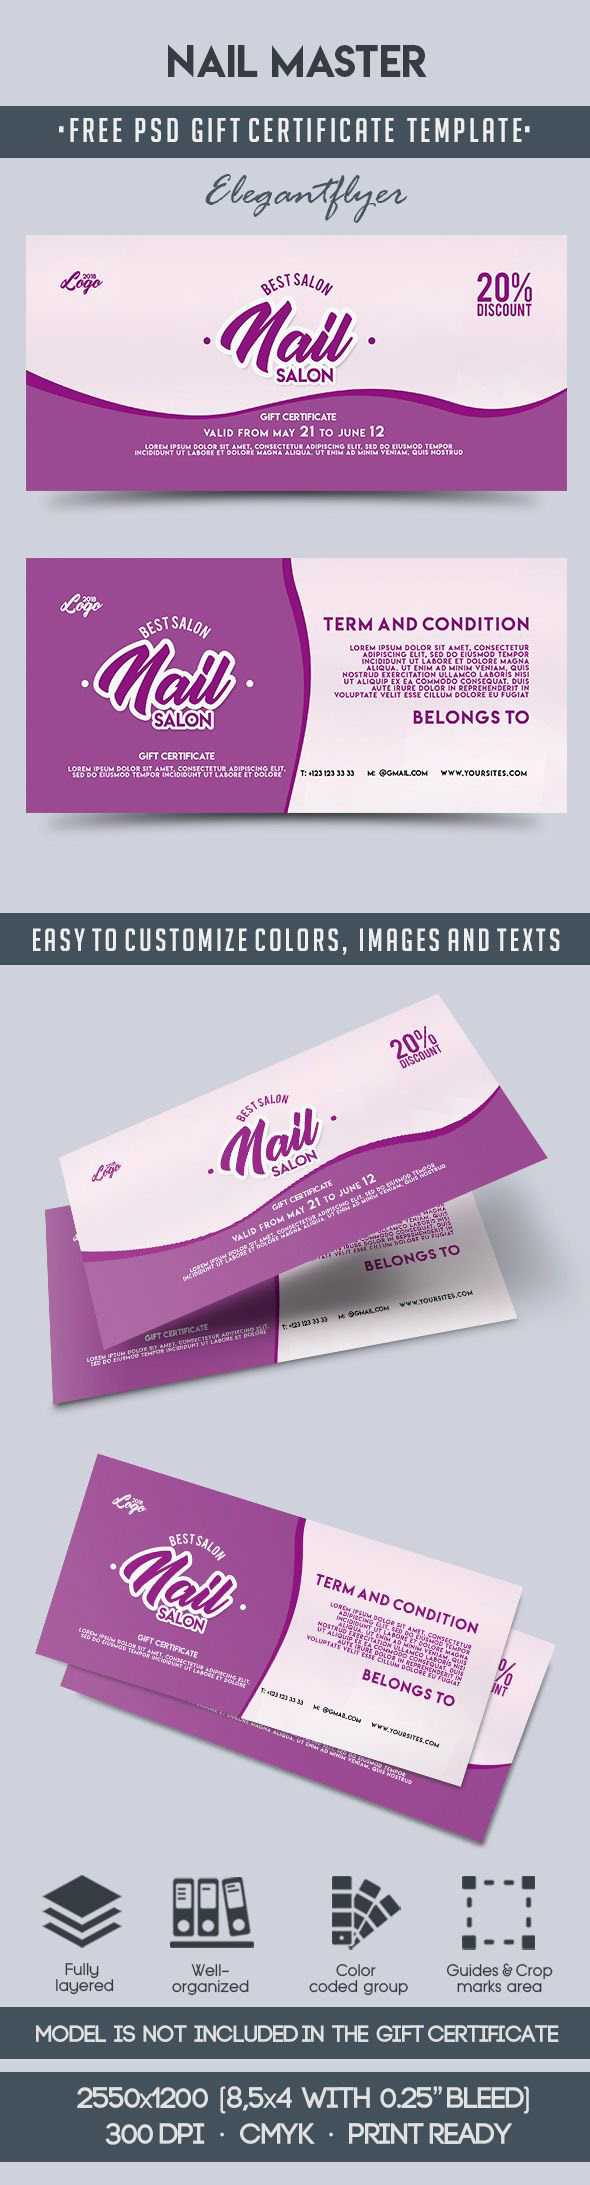 Nail Master – Free Gift Certificate Psd Template On Behance Regarding Nail Gift Certificate Template Free